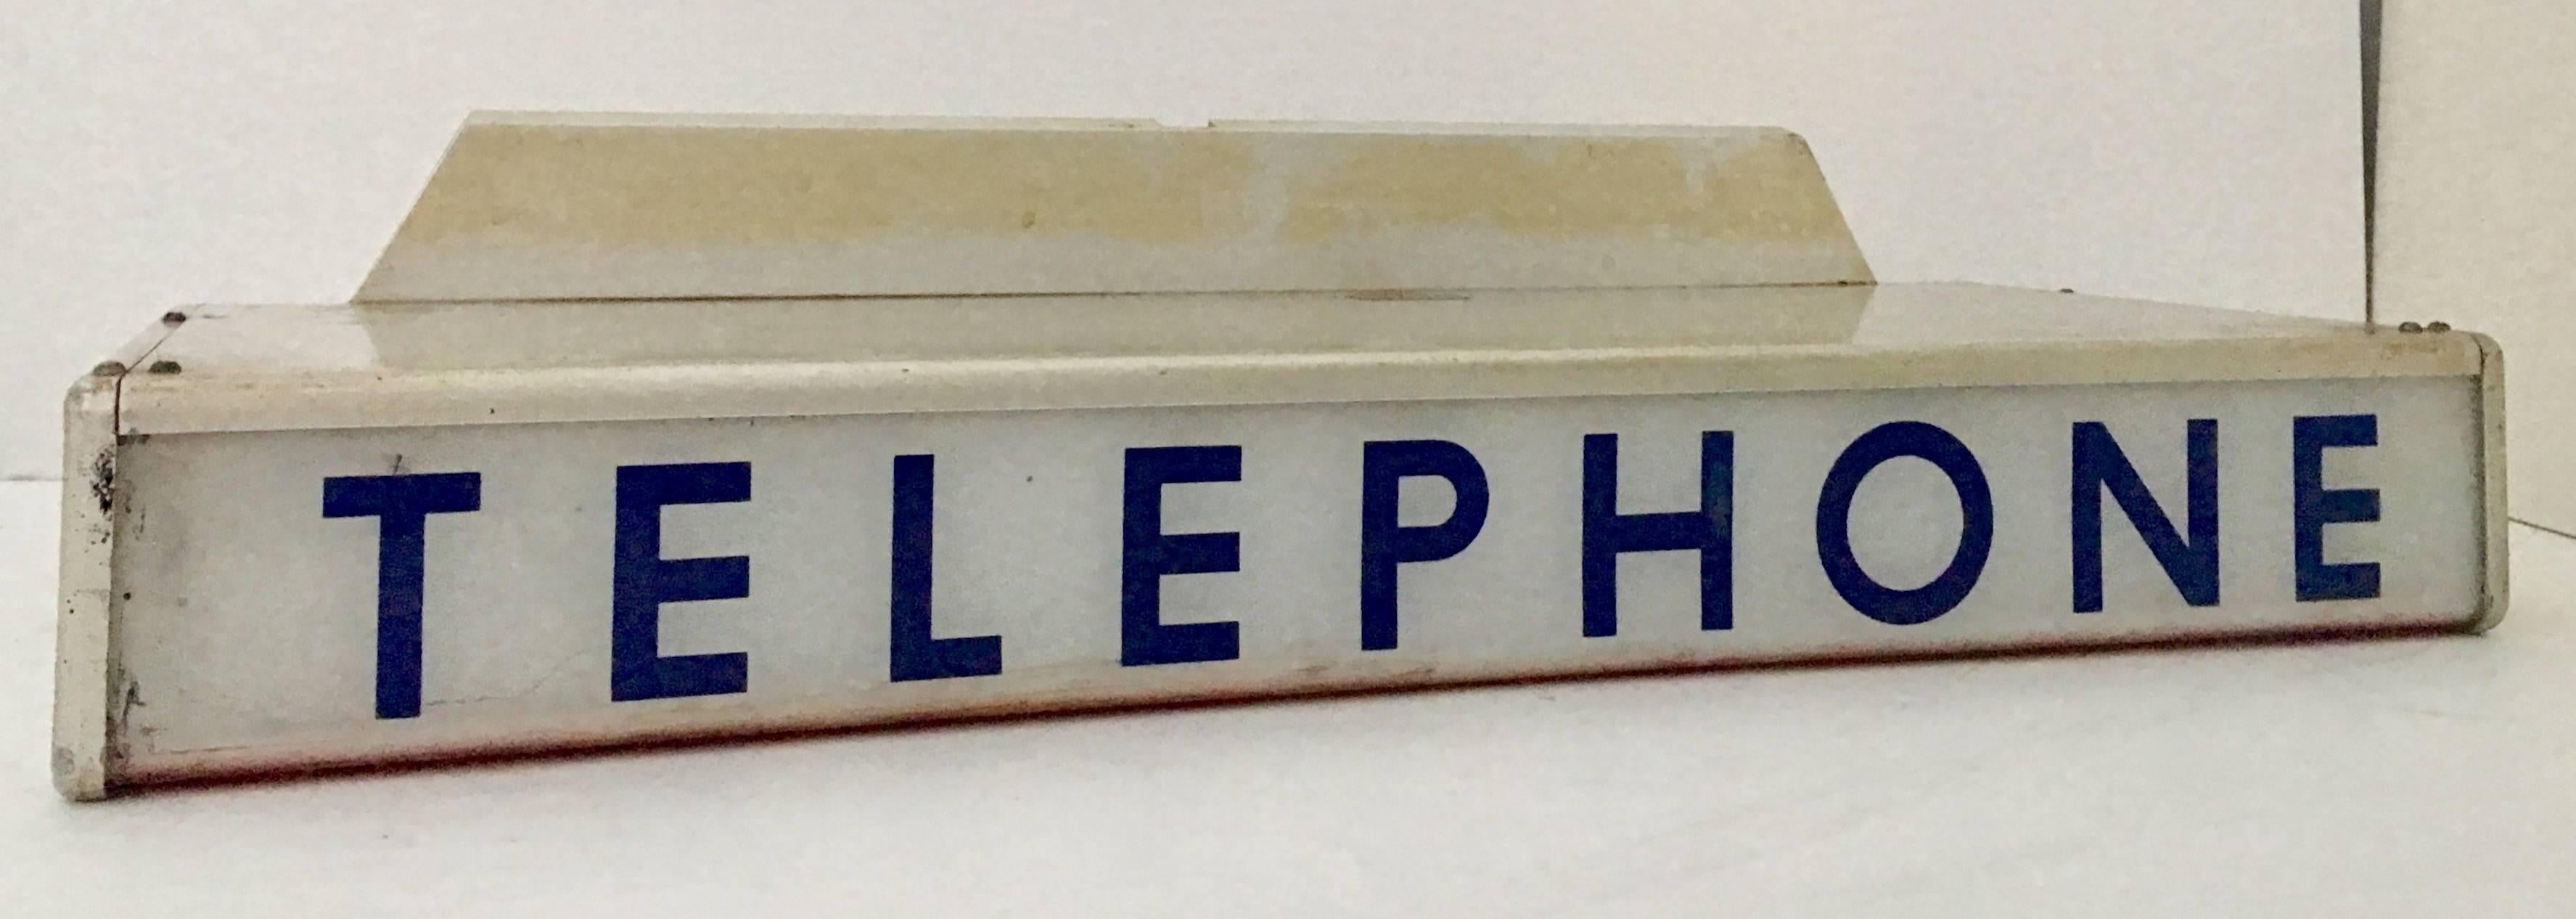 telephone booth sign